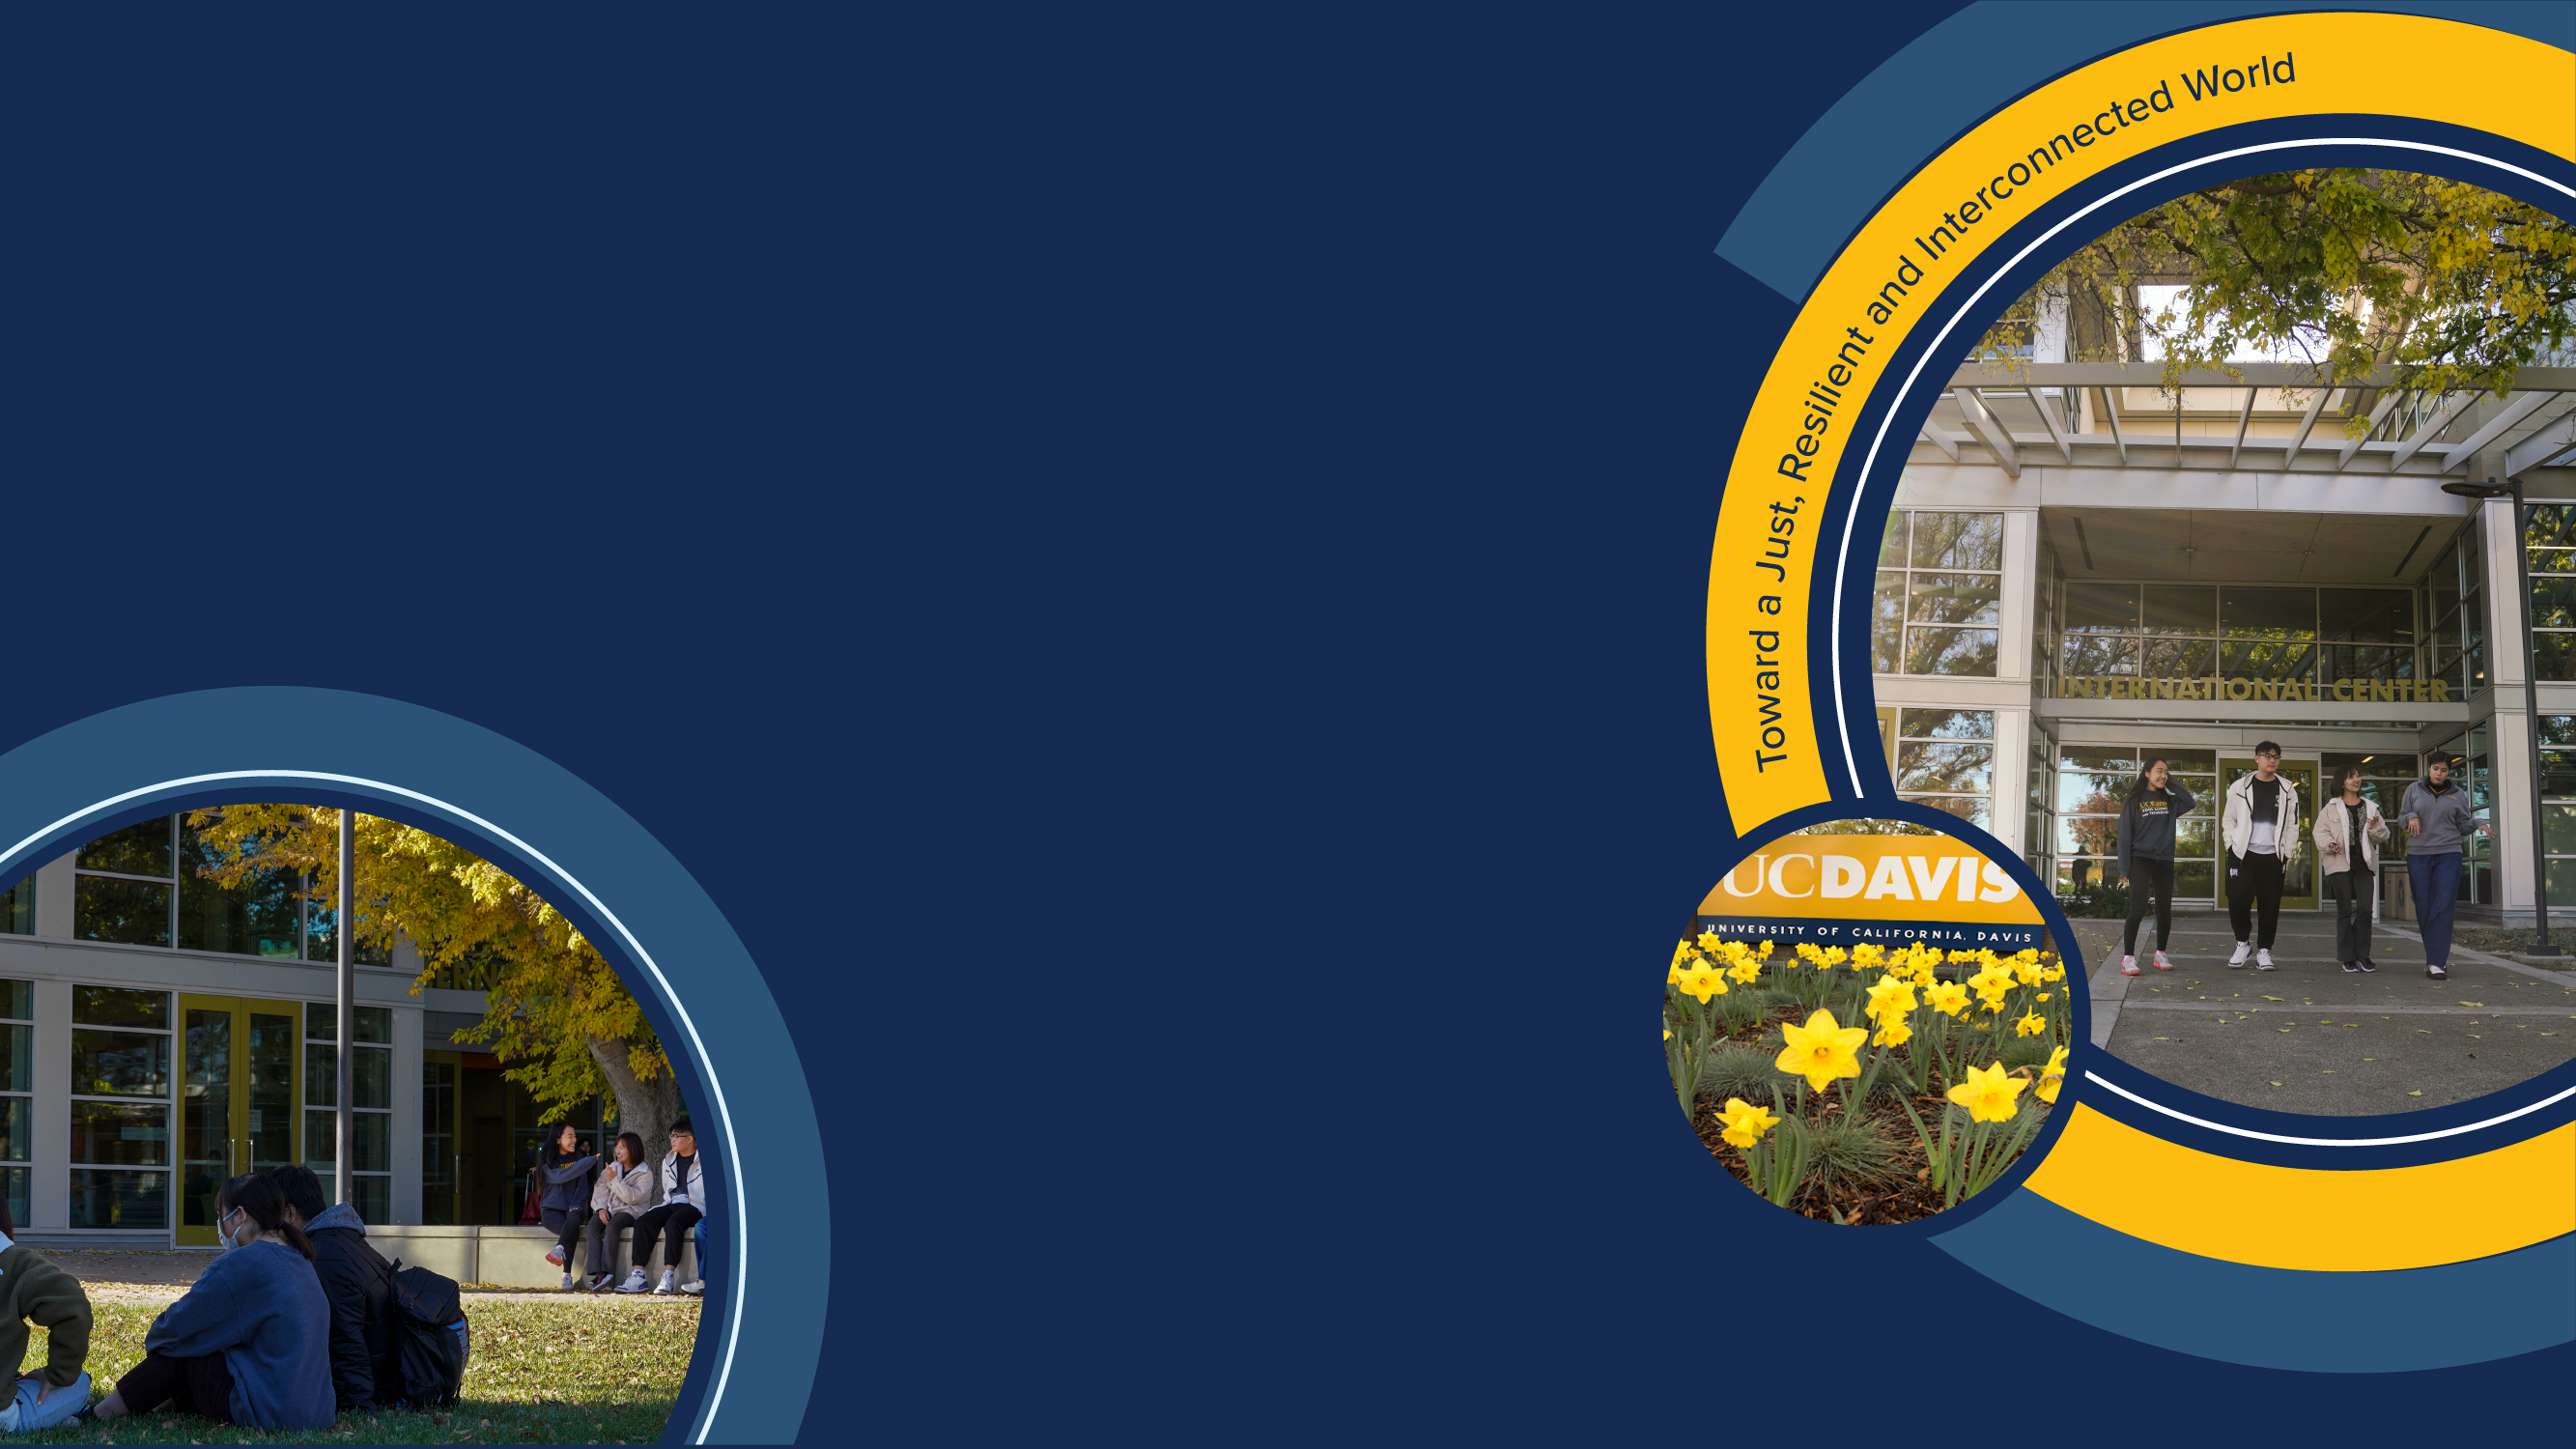 Students are pictured standing outside of the International Center in circular frames on the left and right hand side of the graphic. Text on the right reads "Toward a Just, Resilient and Interconnected World."